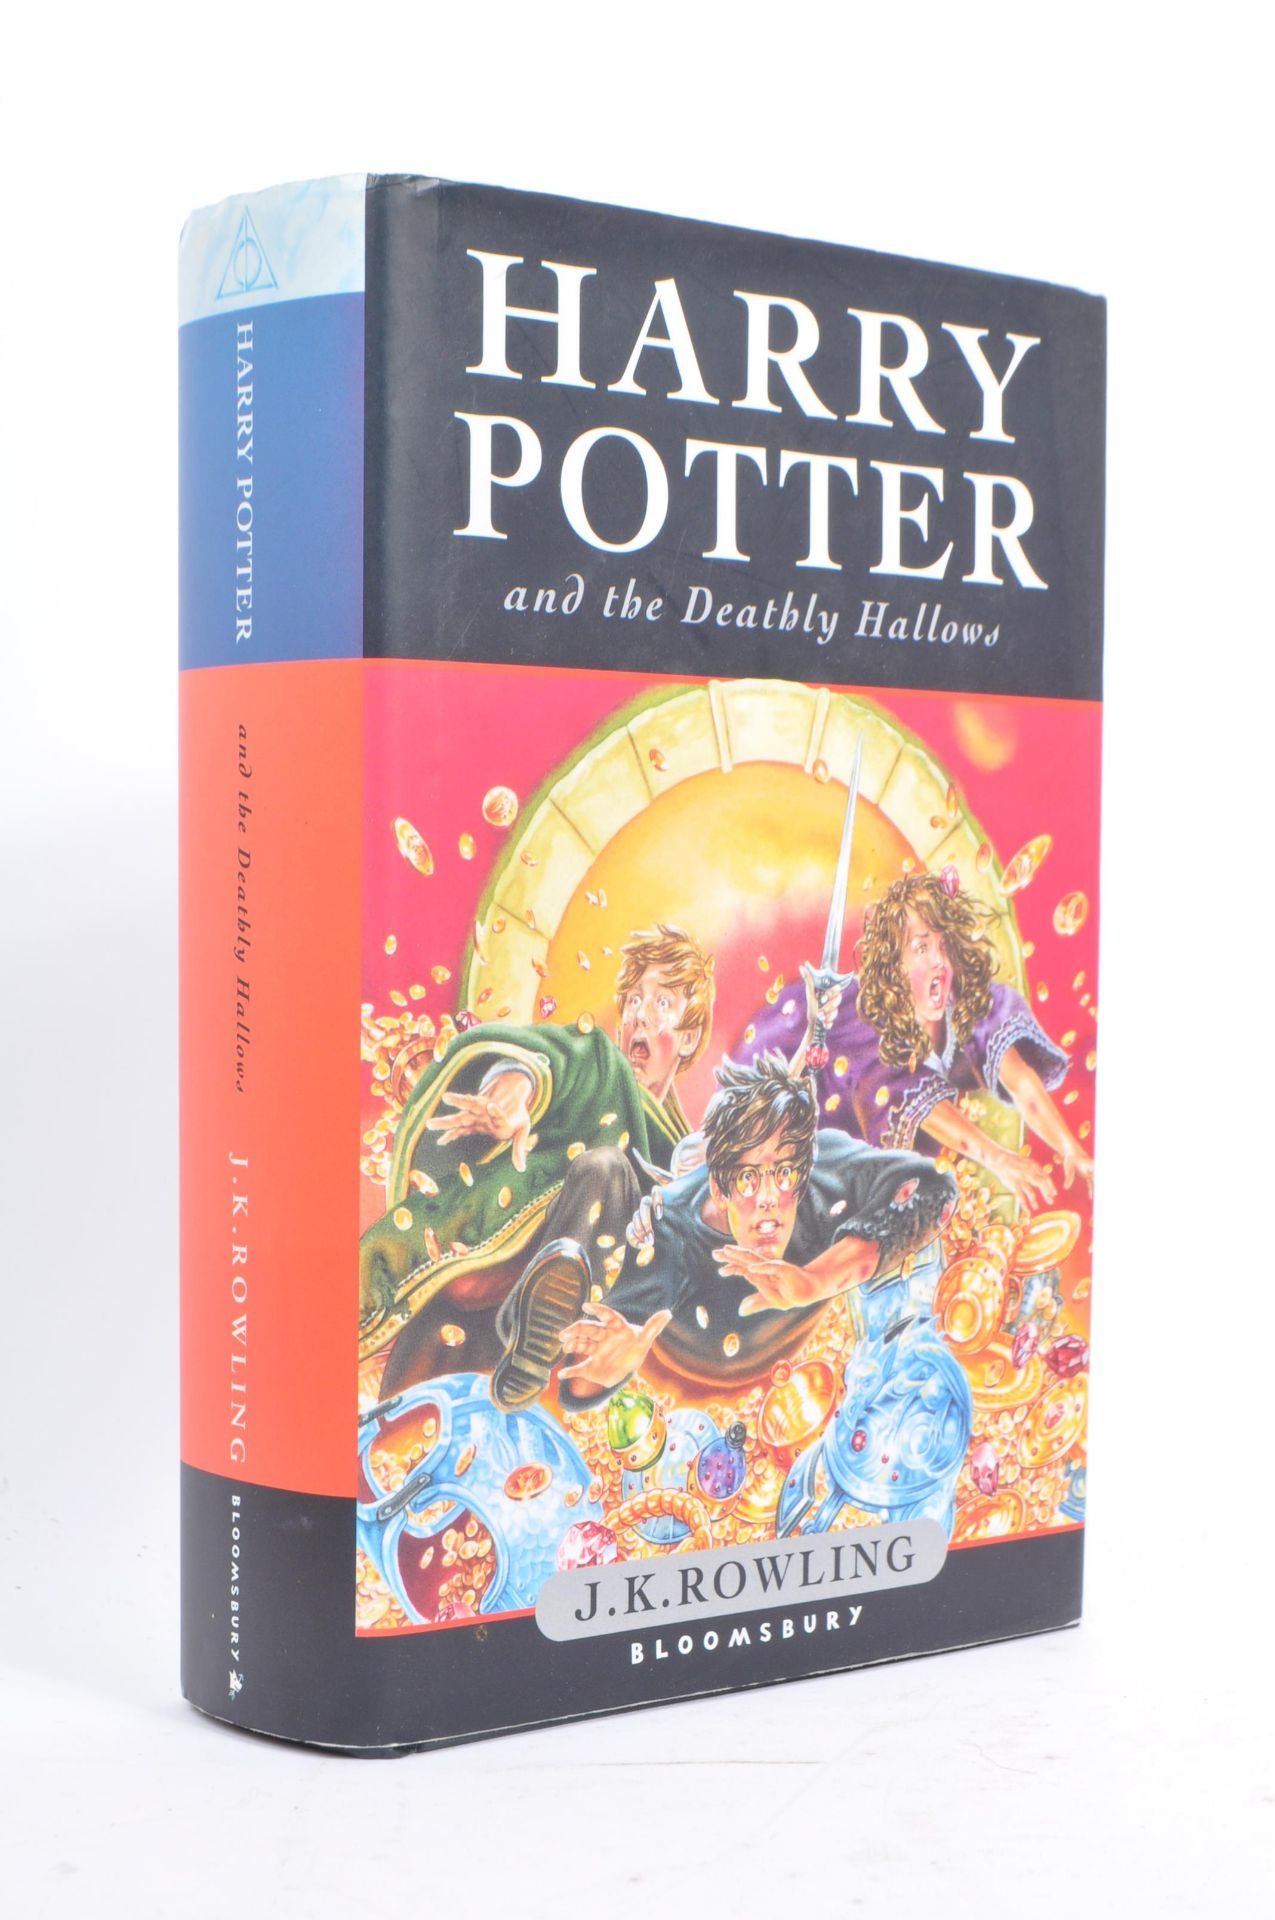 J. K. ROWLING - COLLECTION OF HARRY POTTER BOOKS - Image 9 of 10